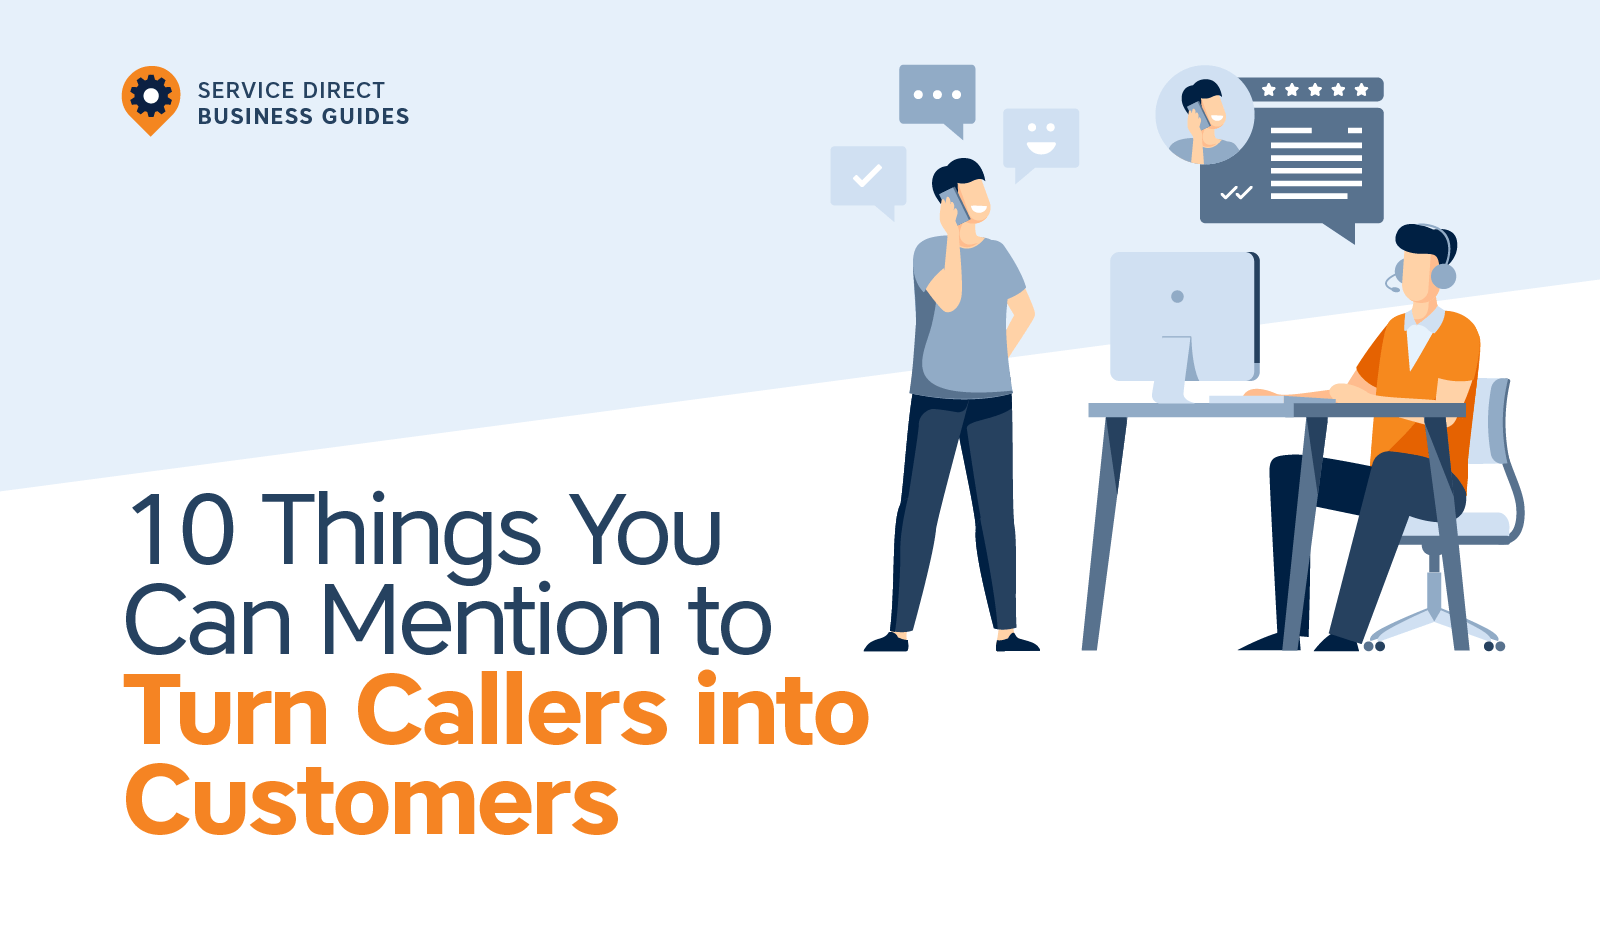 10 Things You Can Mention to Turn Callers Into Customers